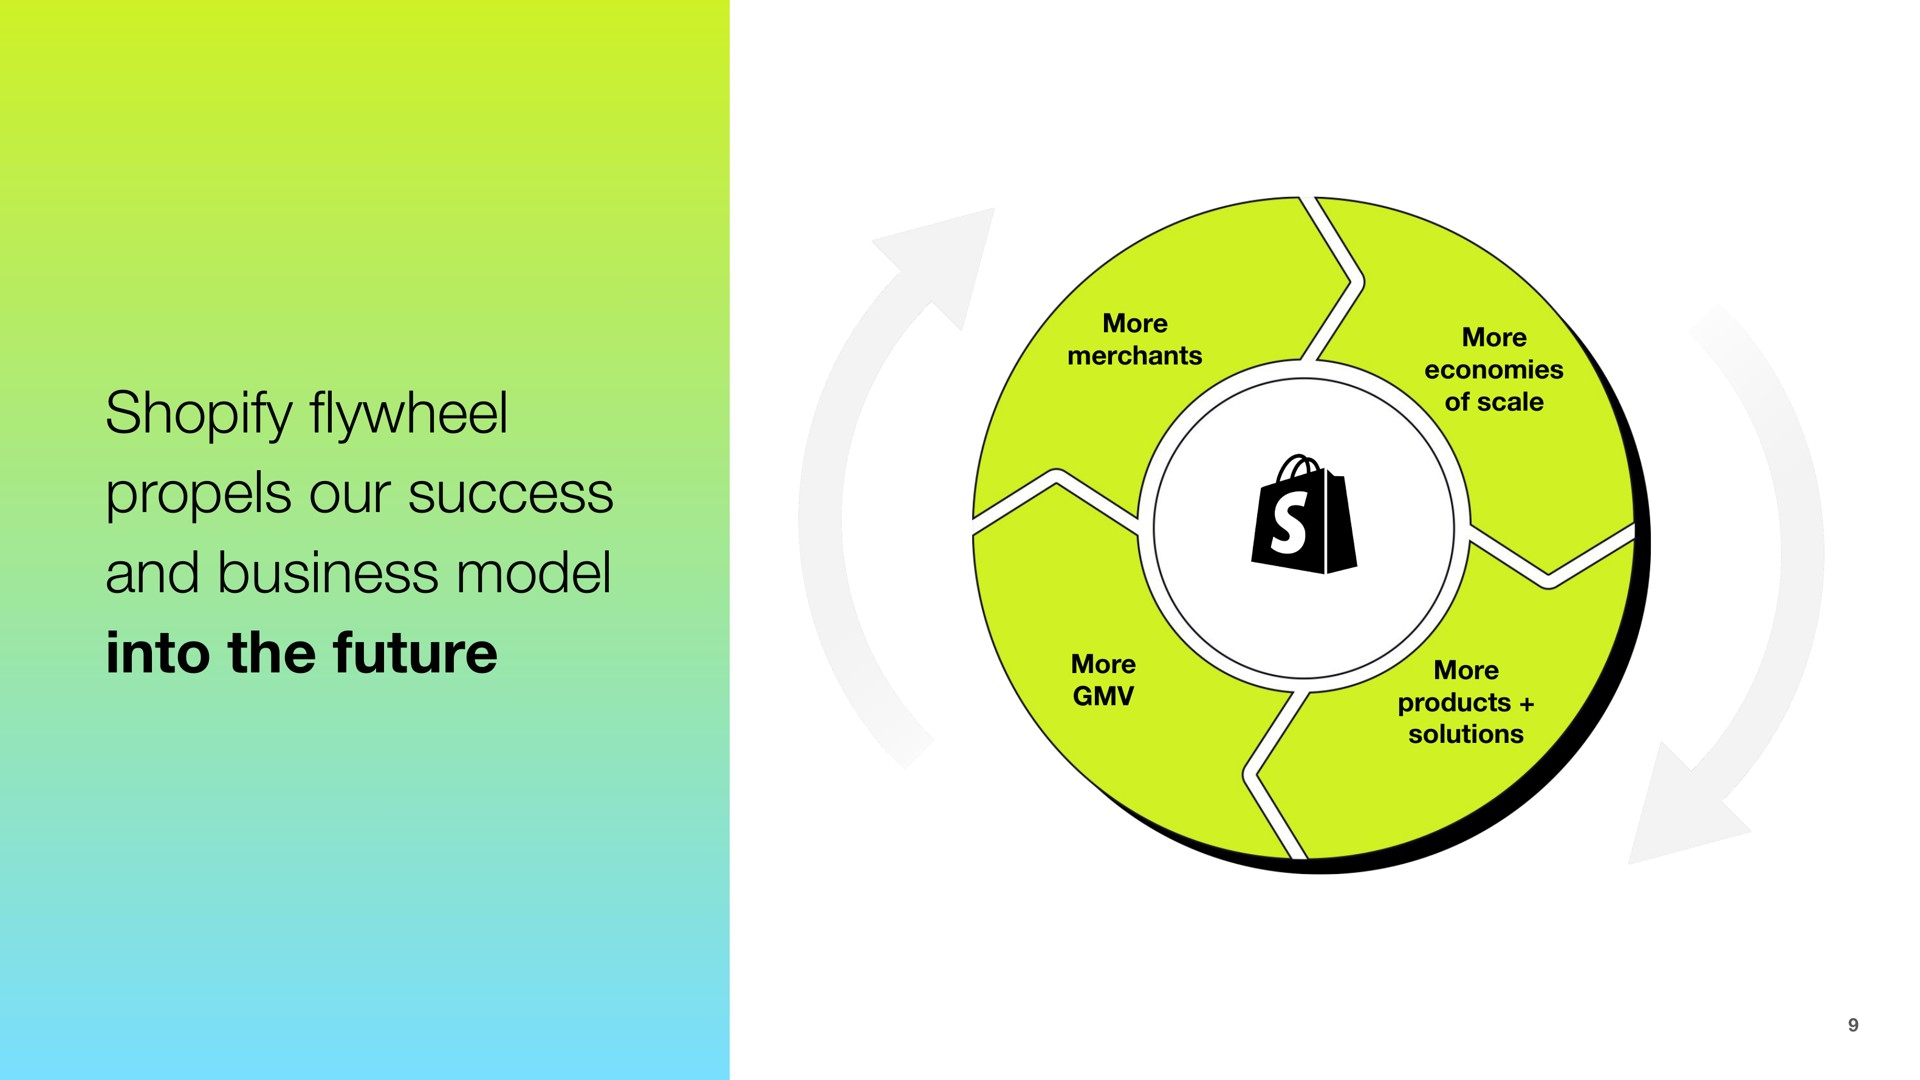 our success and business model into the future flywheel | Shopify